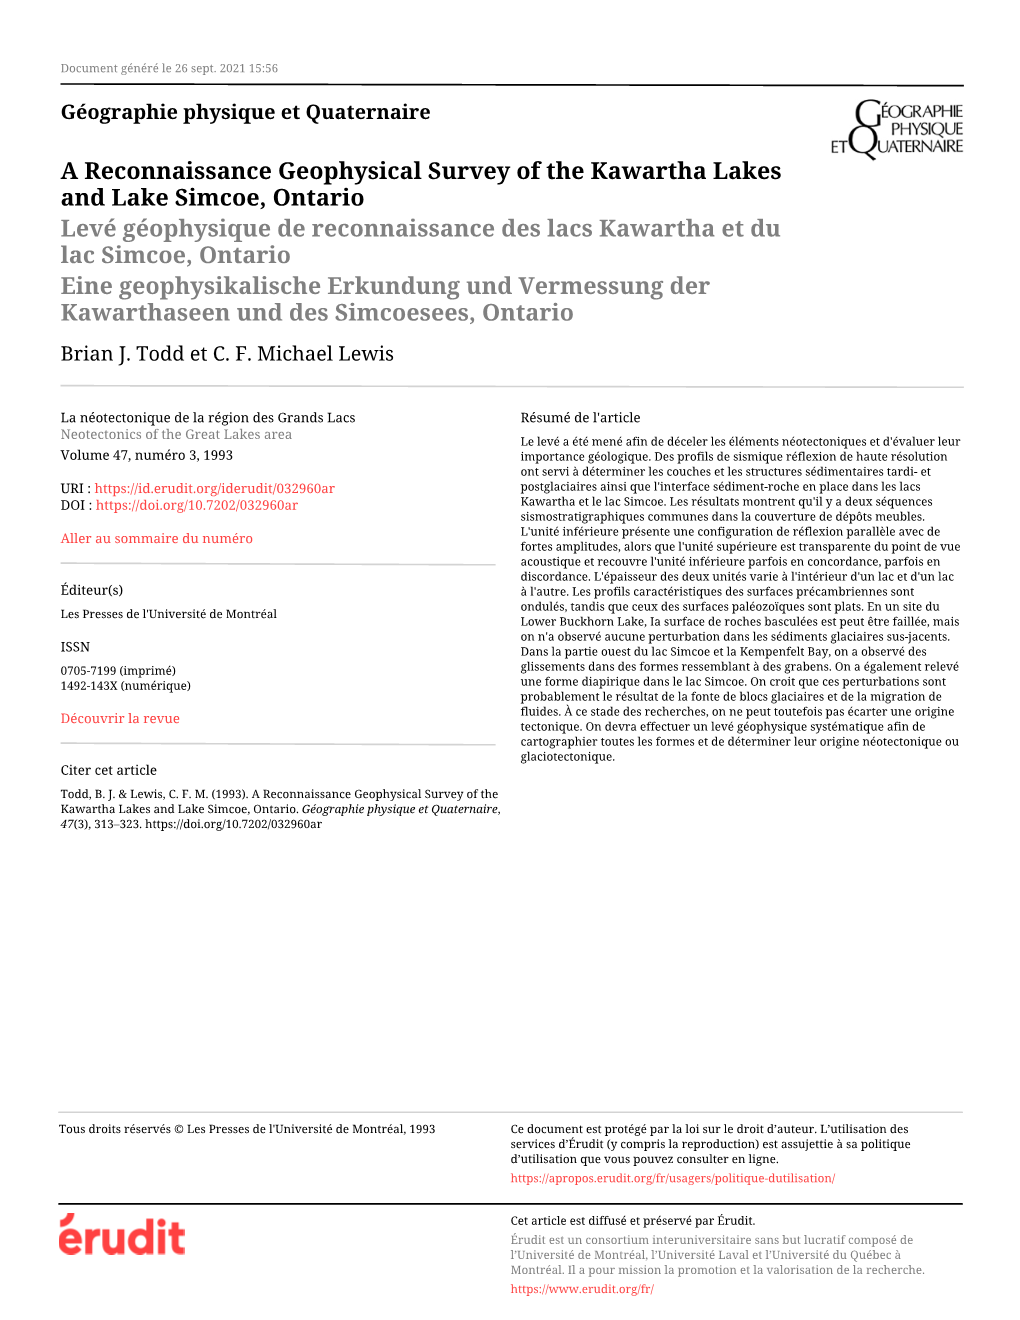 A Reconnaissance Geophysical Survey of the Kawartha Lakes And